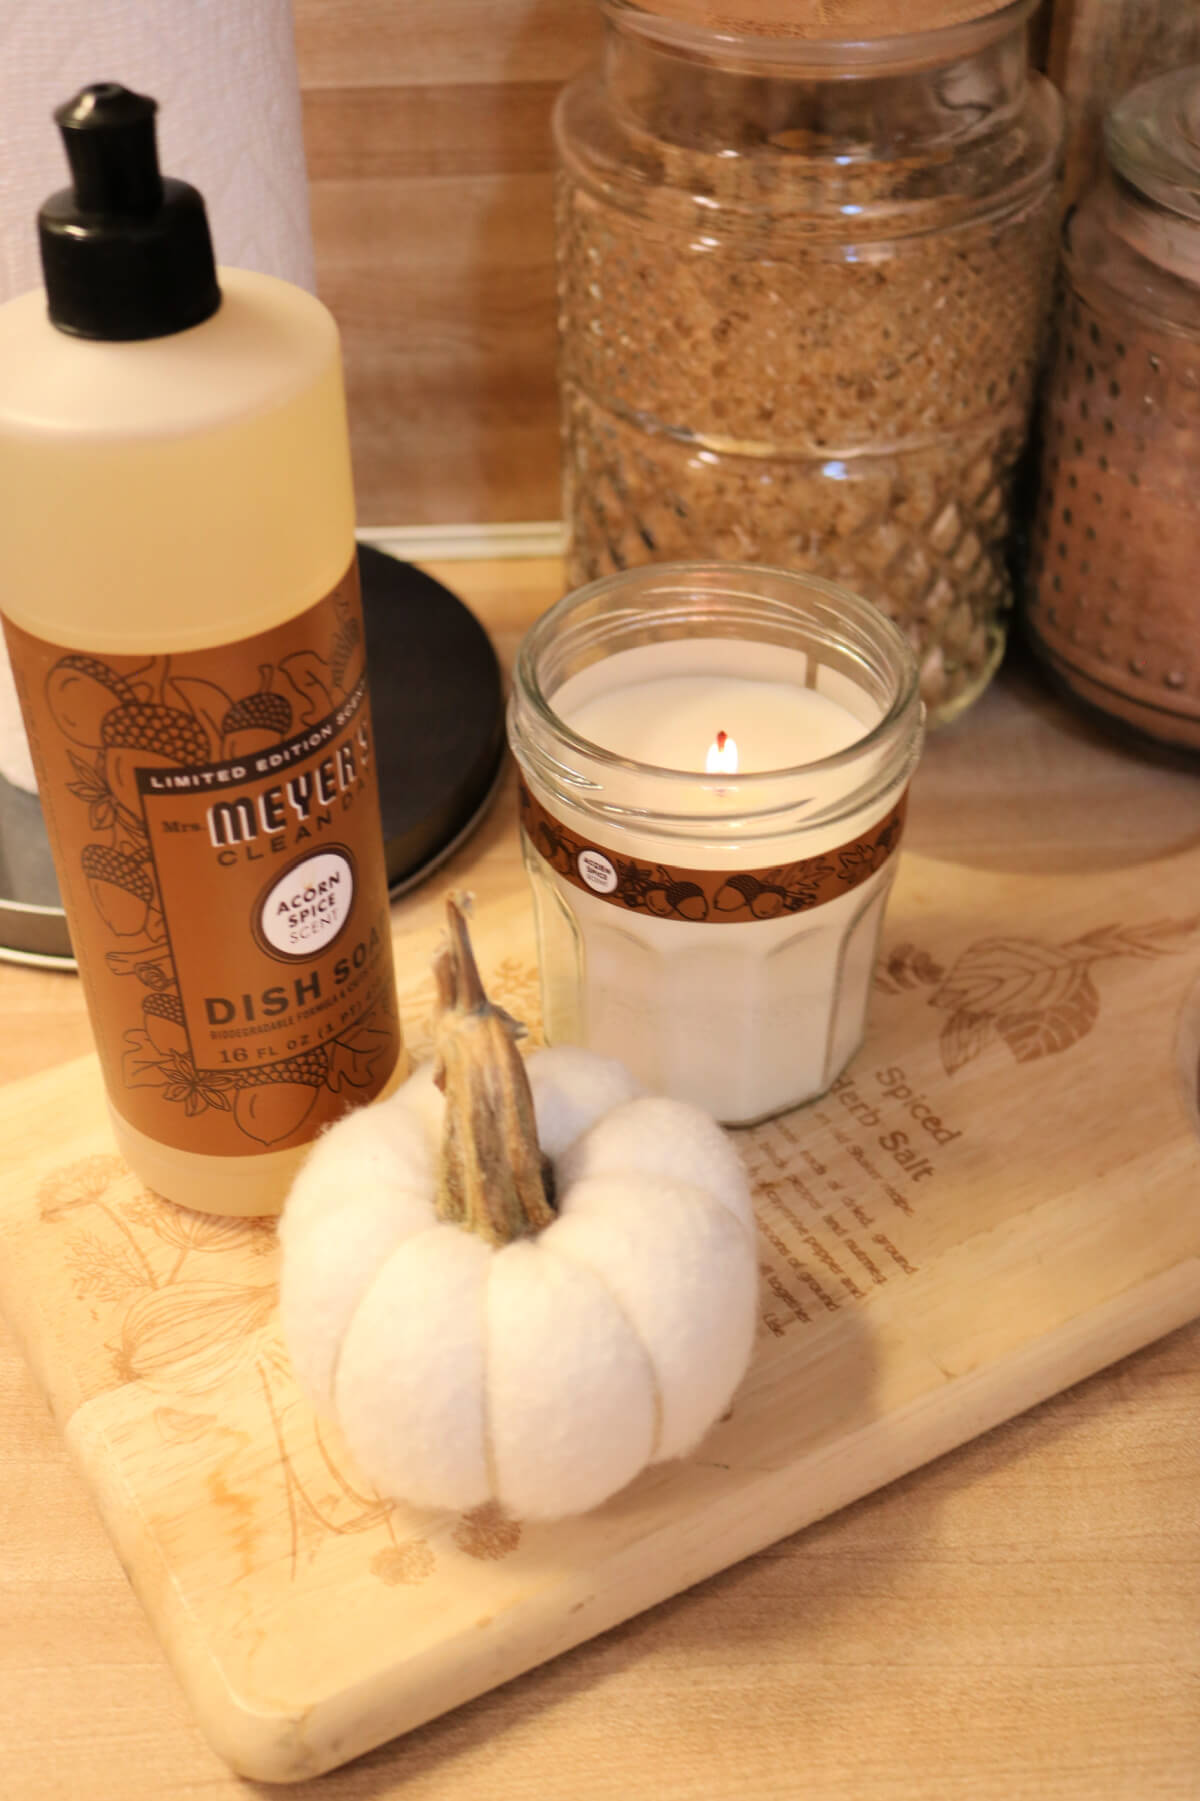 In My Apartment Kitchen Revisited For Fall, Mrs. Meyer's fall line of cleaning products.